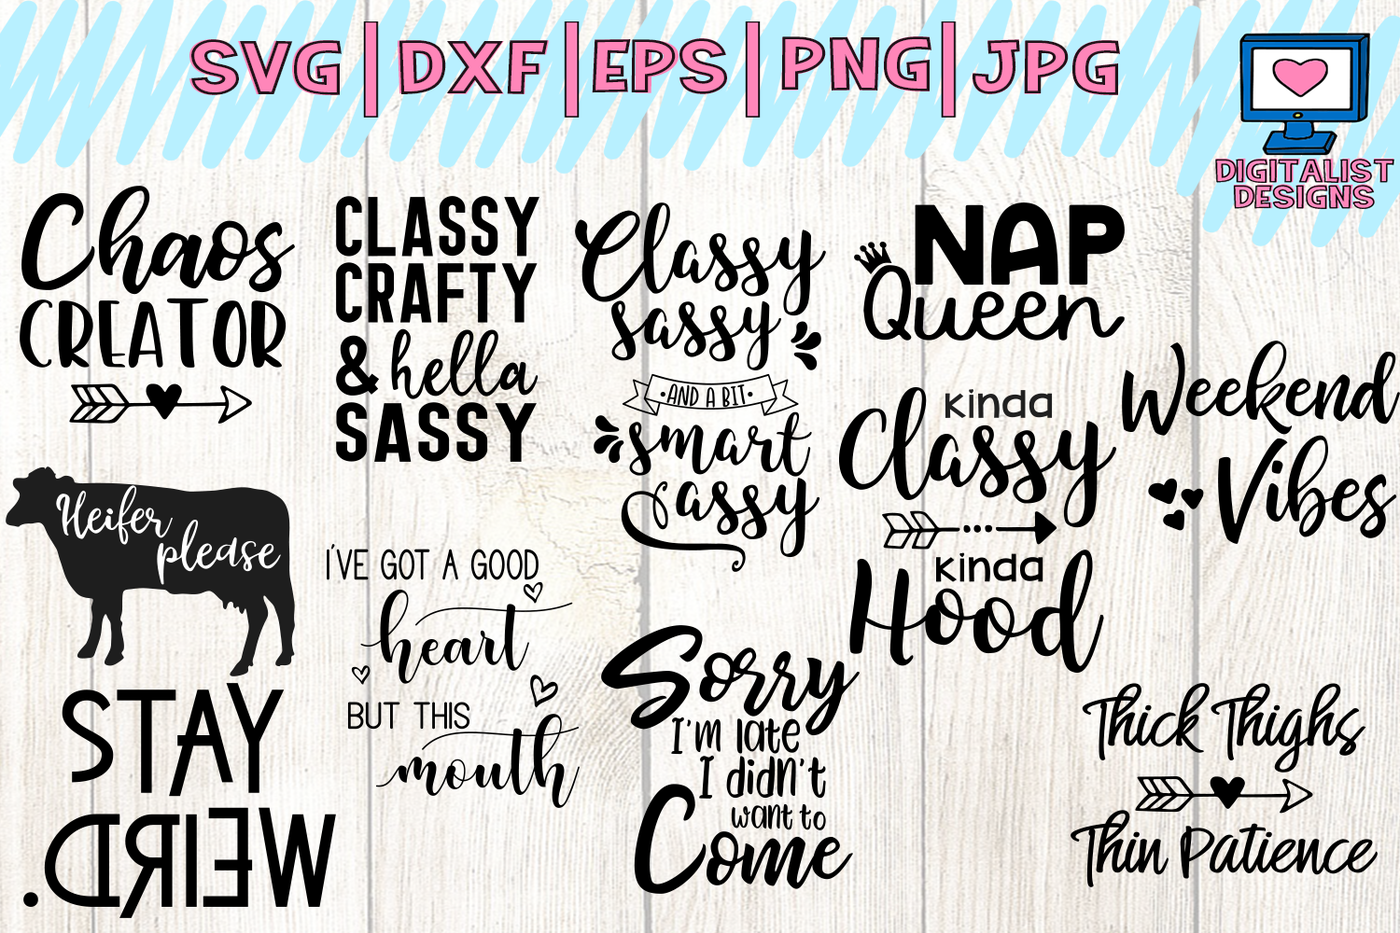 Download Sassy Quotes Bundle Svg Funny Quotes Dxf Png Jpg Eps By Digitalistdesigns Thehungryjpeg Com SVG, PNG, EPS, DXF File